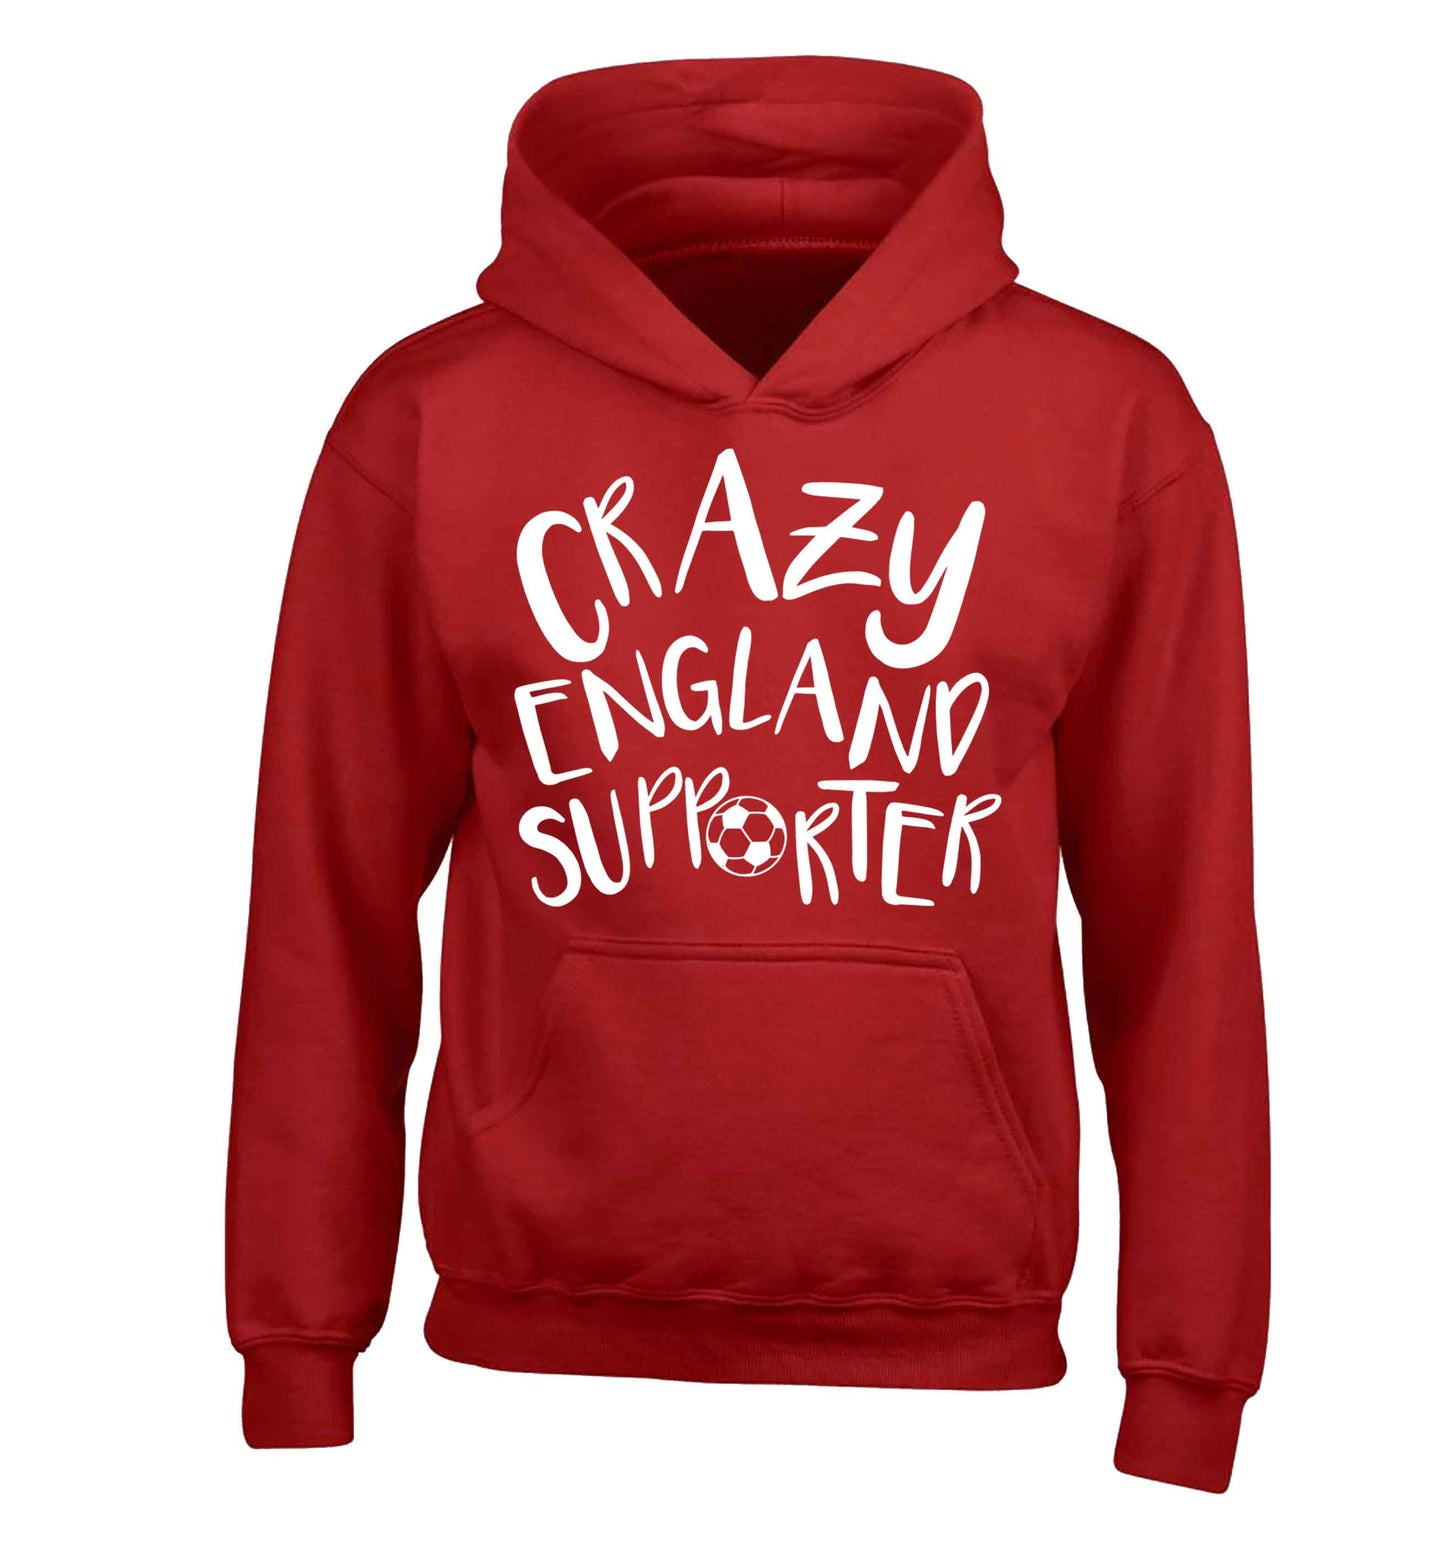 Crazy England supporter children's red hoodie 12-13 Years